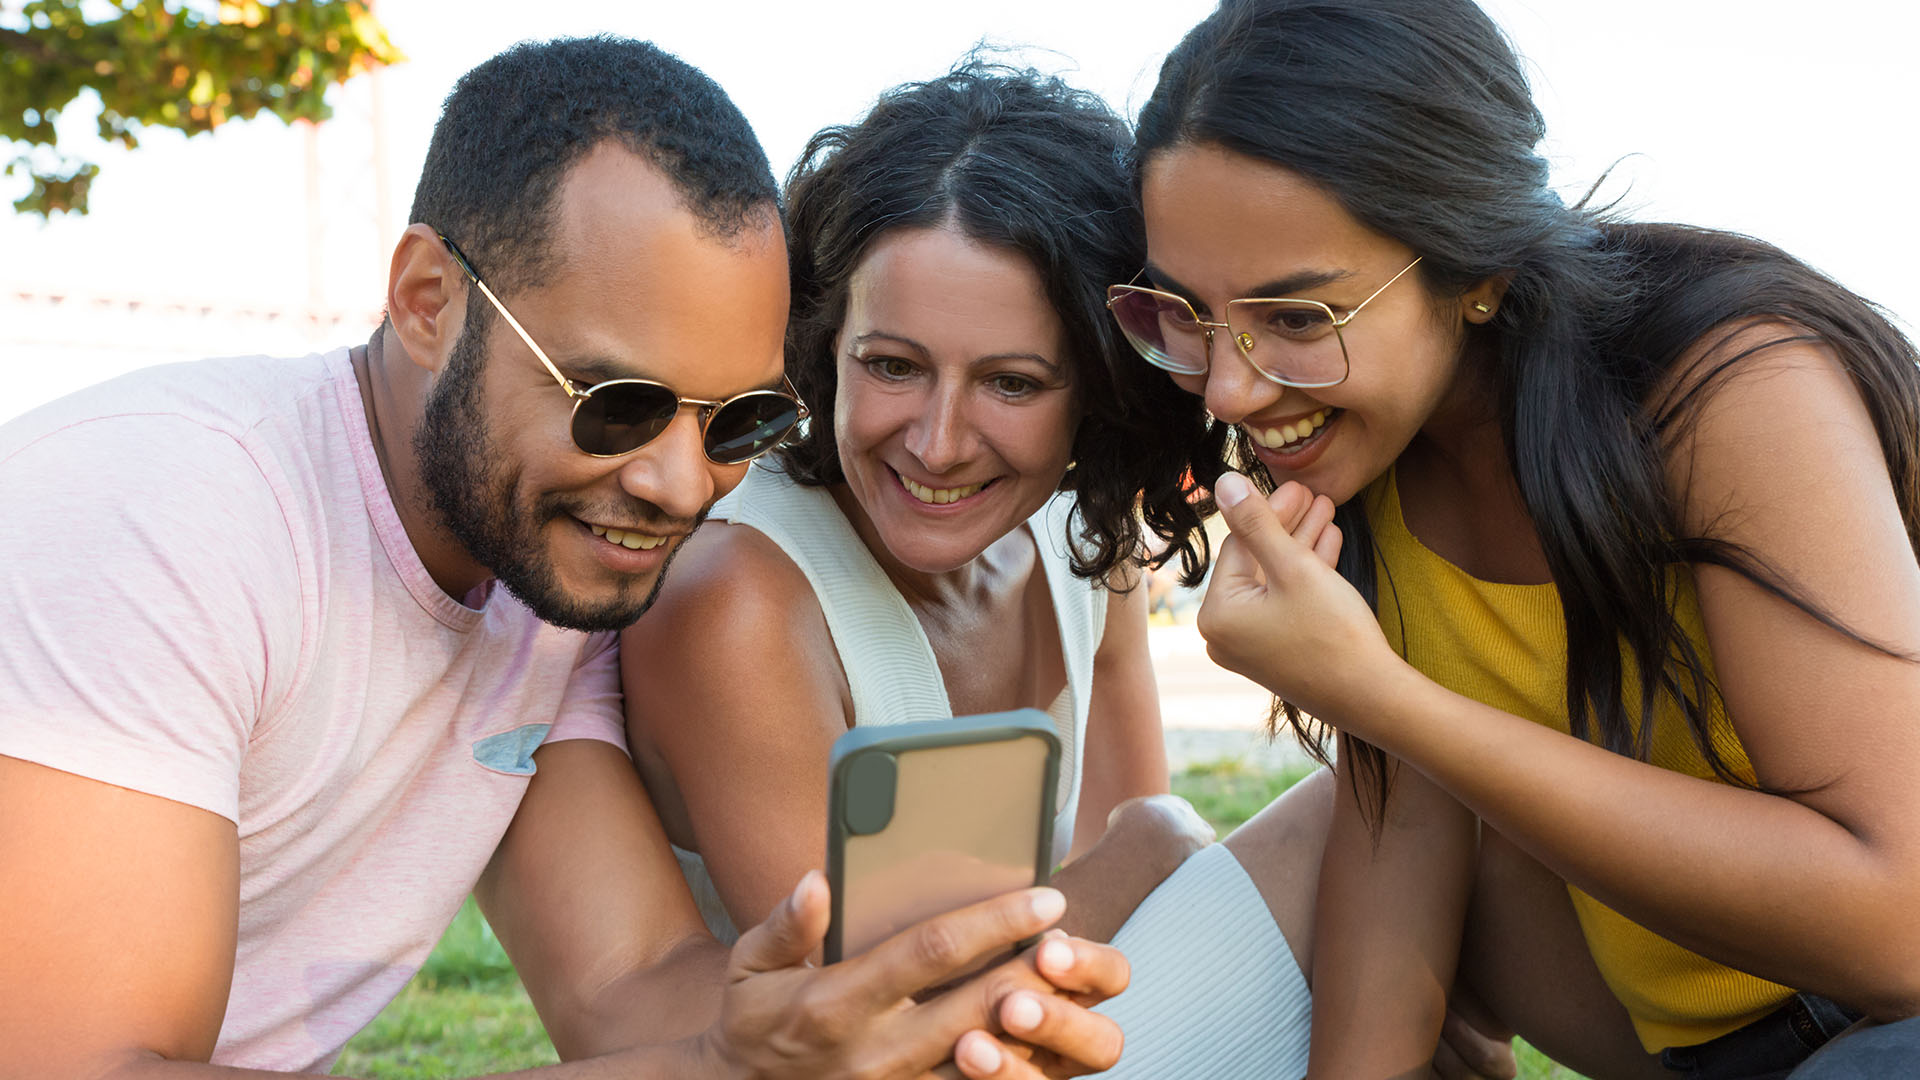 Brunette man and two women from different ethnicities, smiling while looking at at a phone. They are at a park.